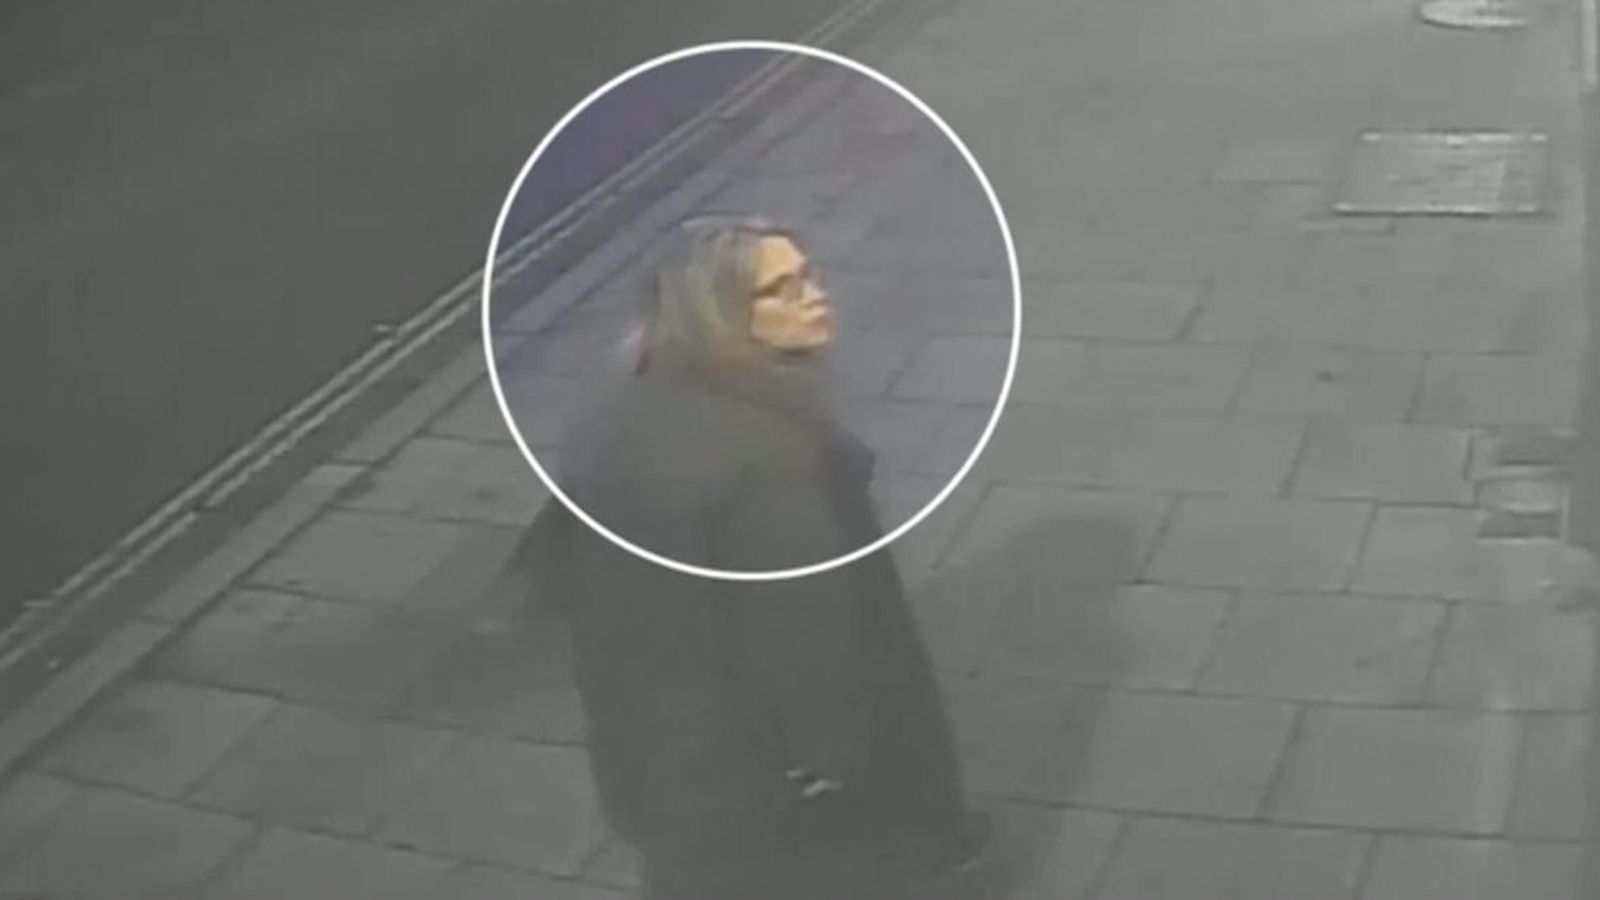 Missing mother Gaynor Lord's friend says she missed call from her minutes after last CCTV sighting